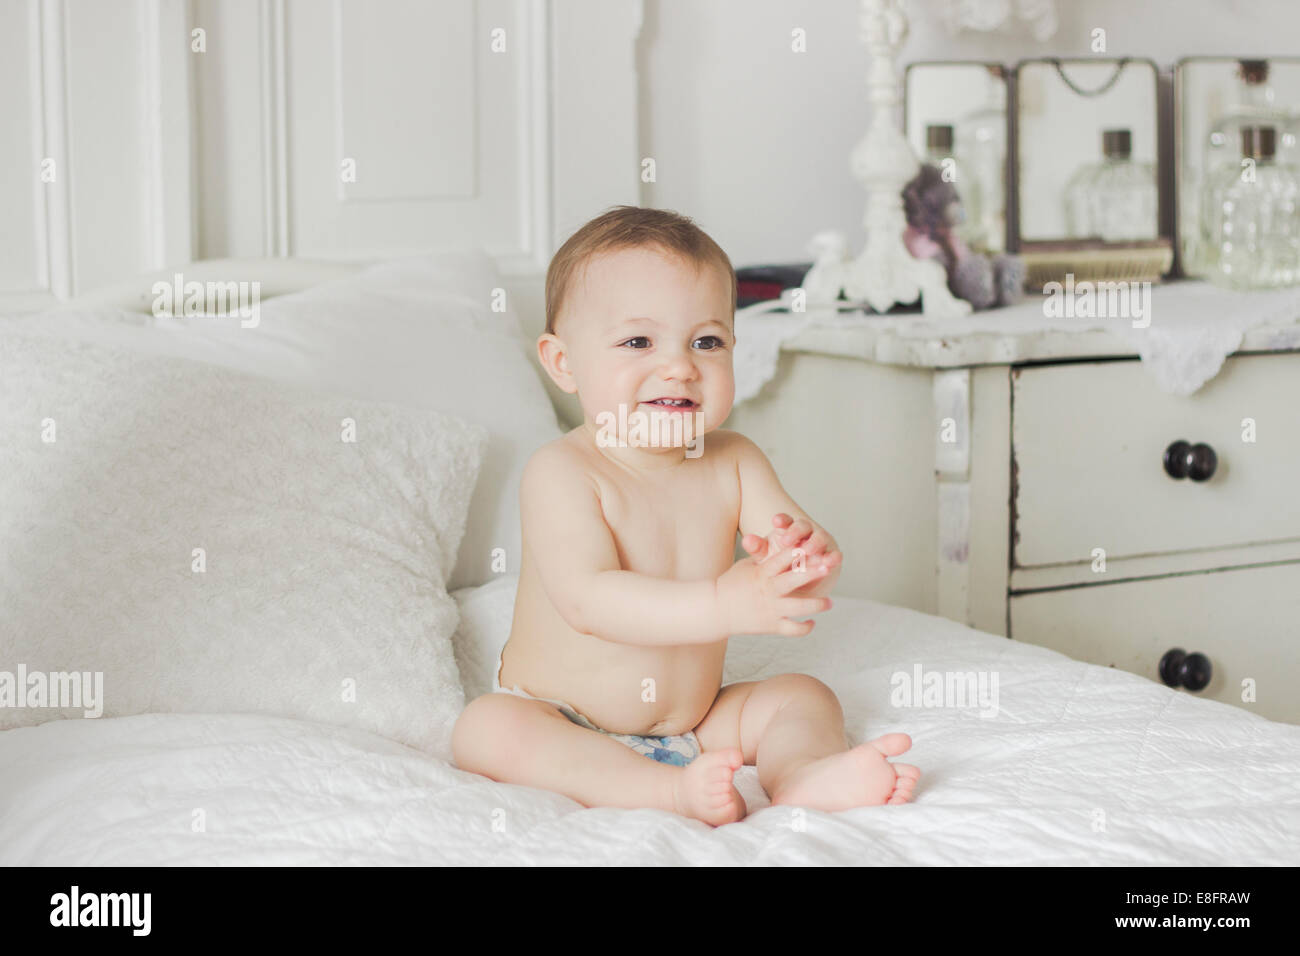 Portrait of Smiling baby sitting on bed in bedroom Stock Photo